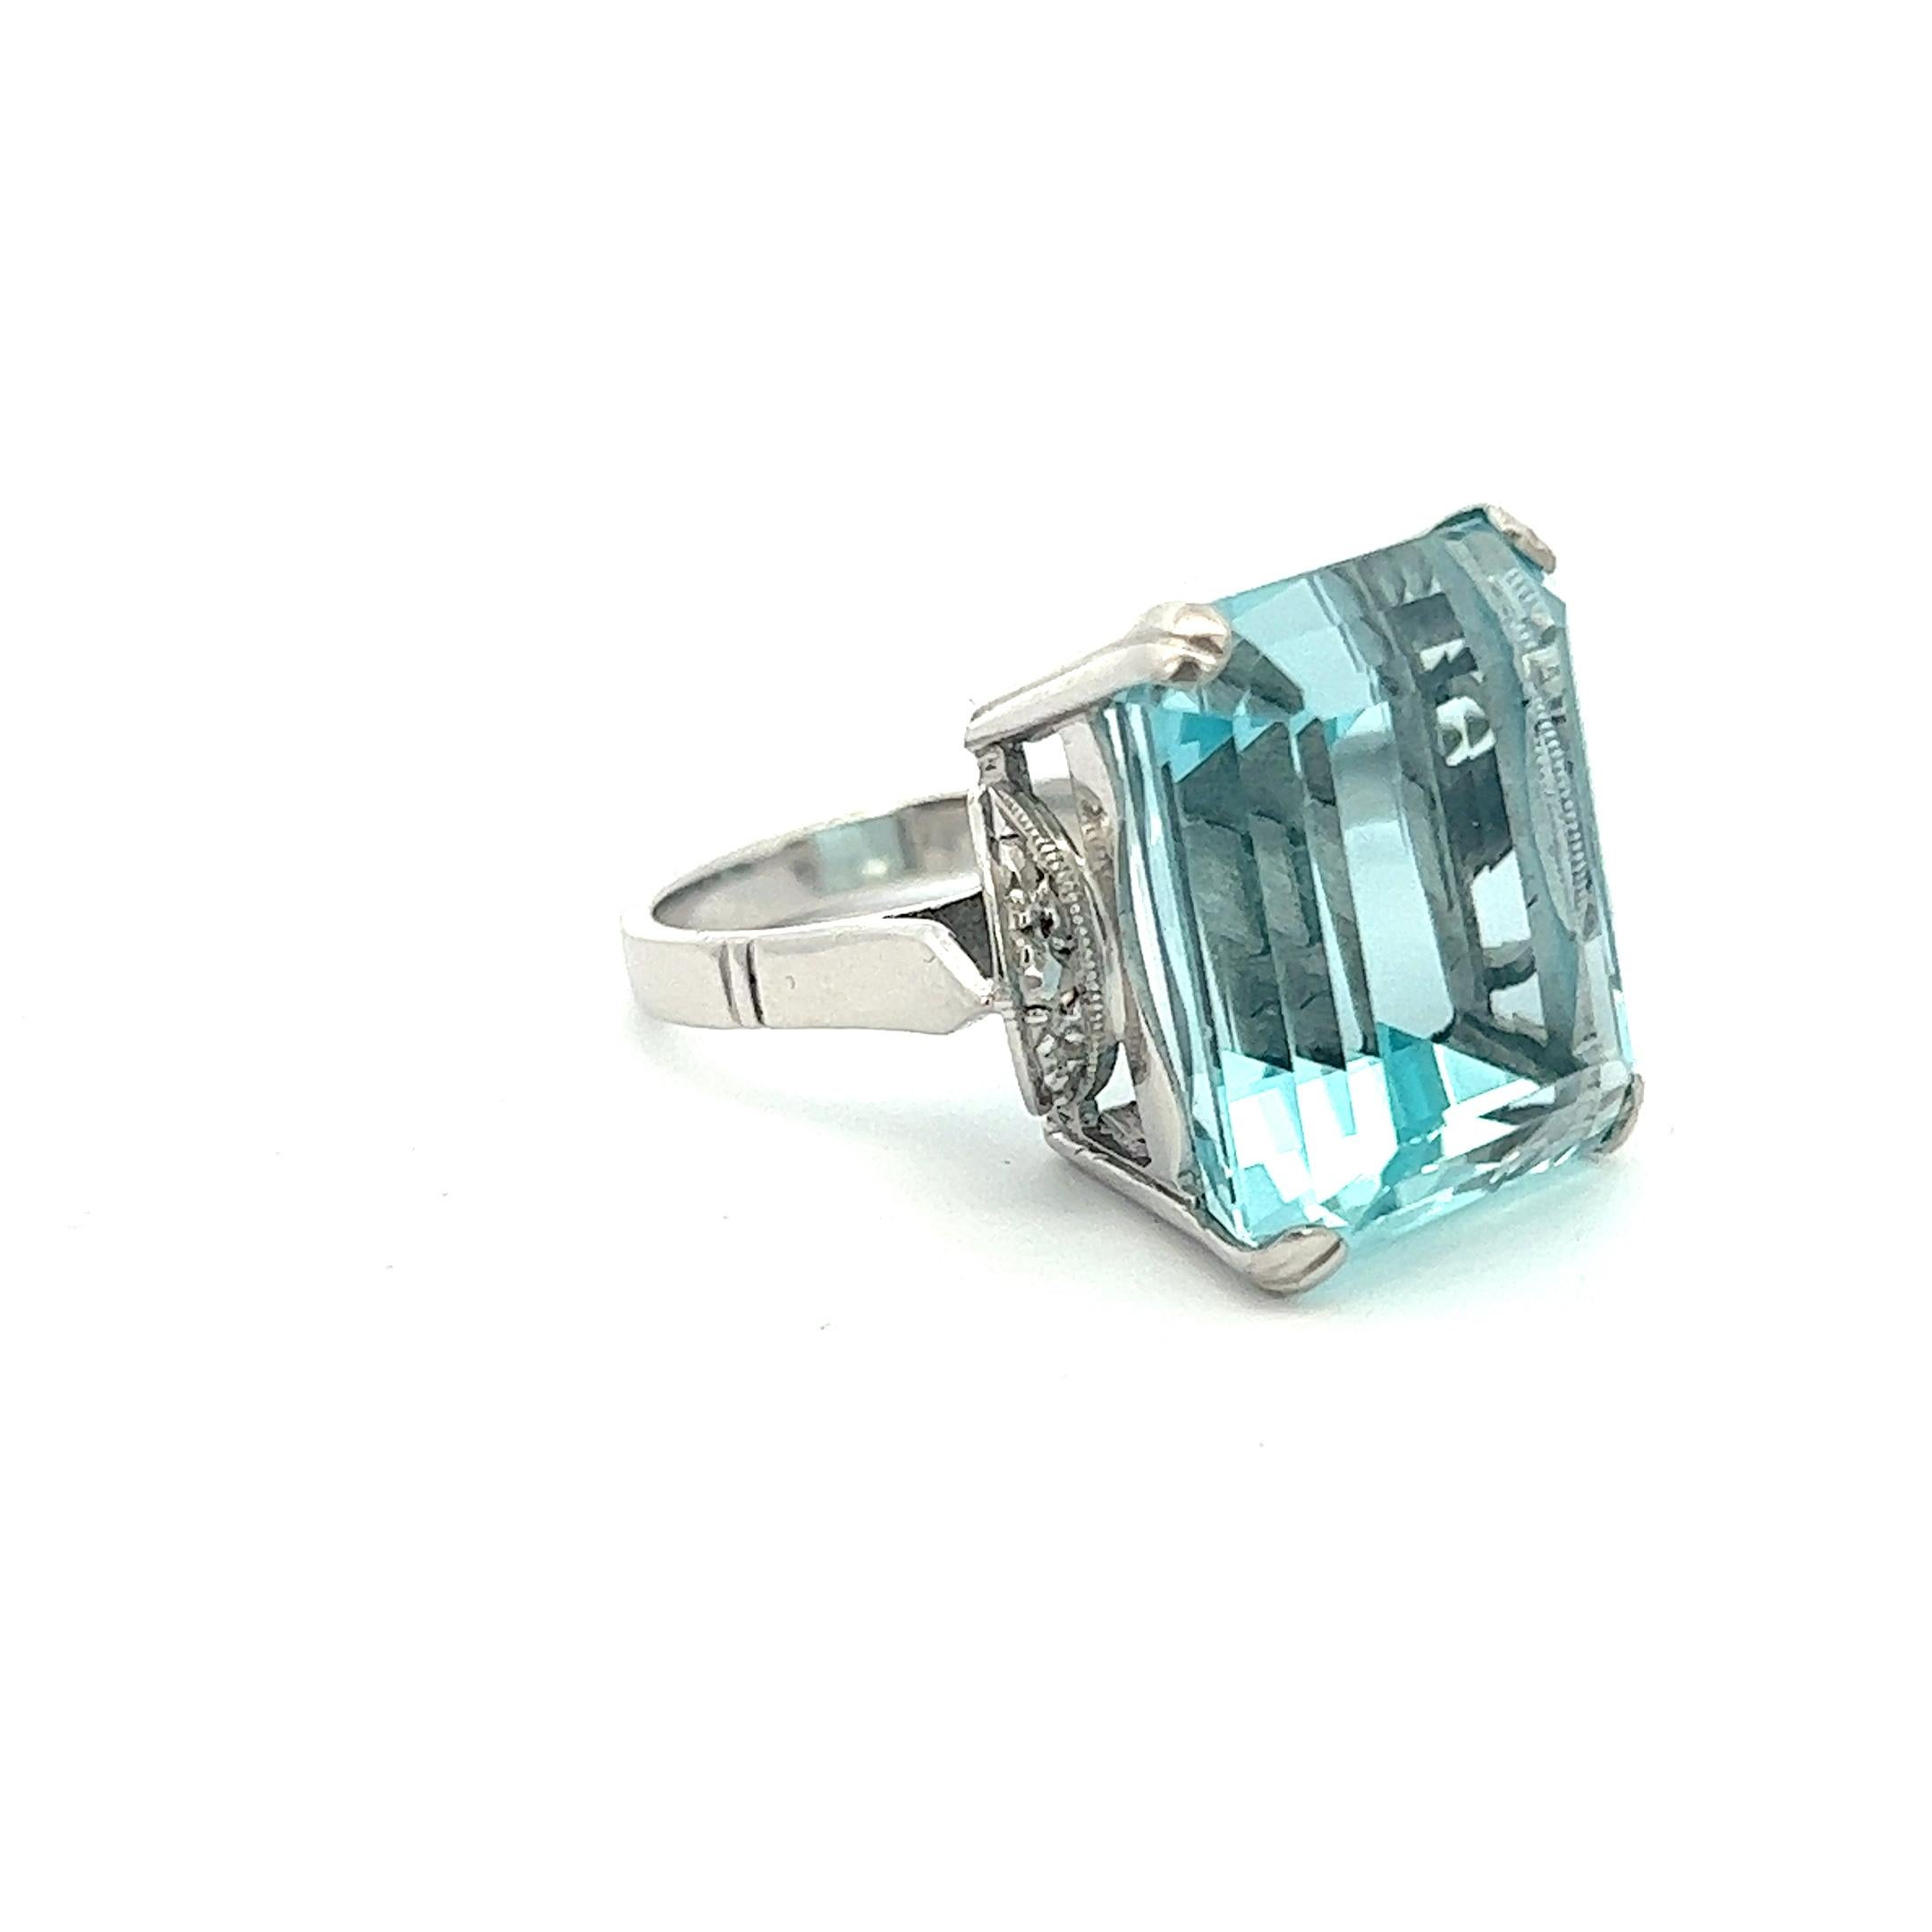 Presenting an awe-inspiring aquamarine ring showcasing a magnificent GIA certified 25.3 carat emerald cut aquamarine securely set in an elegant four-prong setting.

Circa 1960 - 1970s, purchased from an estate, the centre stone is beautifully